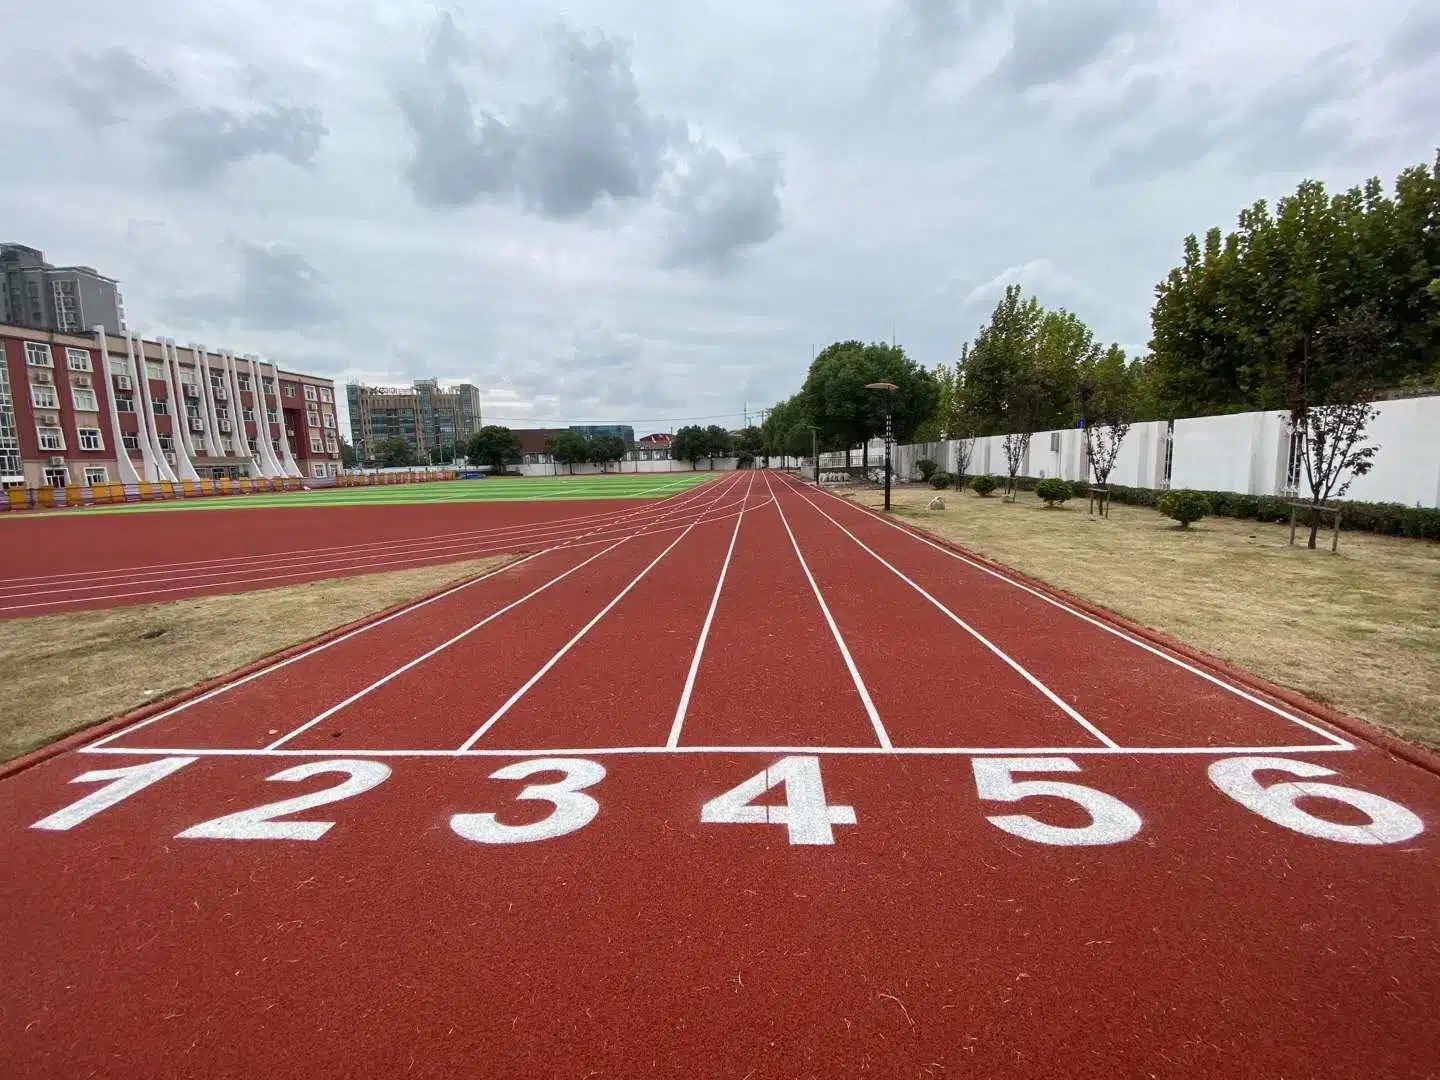 The Two Layer Sandwich System Running Track Consists of SBR Base Rubber Crumb Material Mixed Onsite with Polyurethane Binder and EPDM Rubberized Running Track